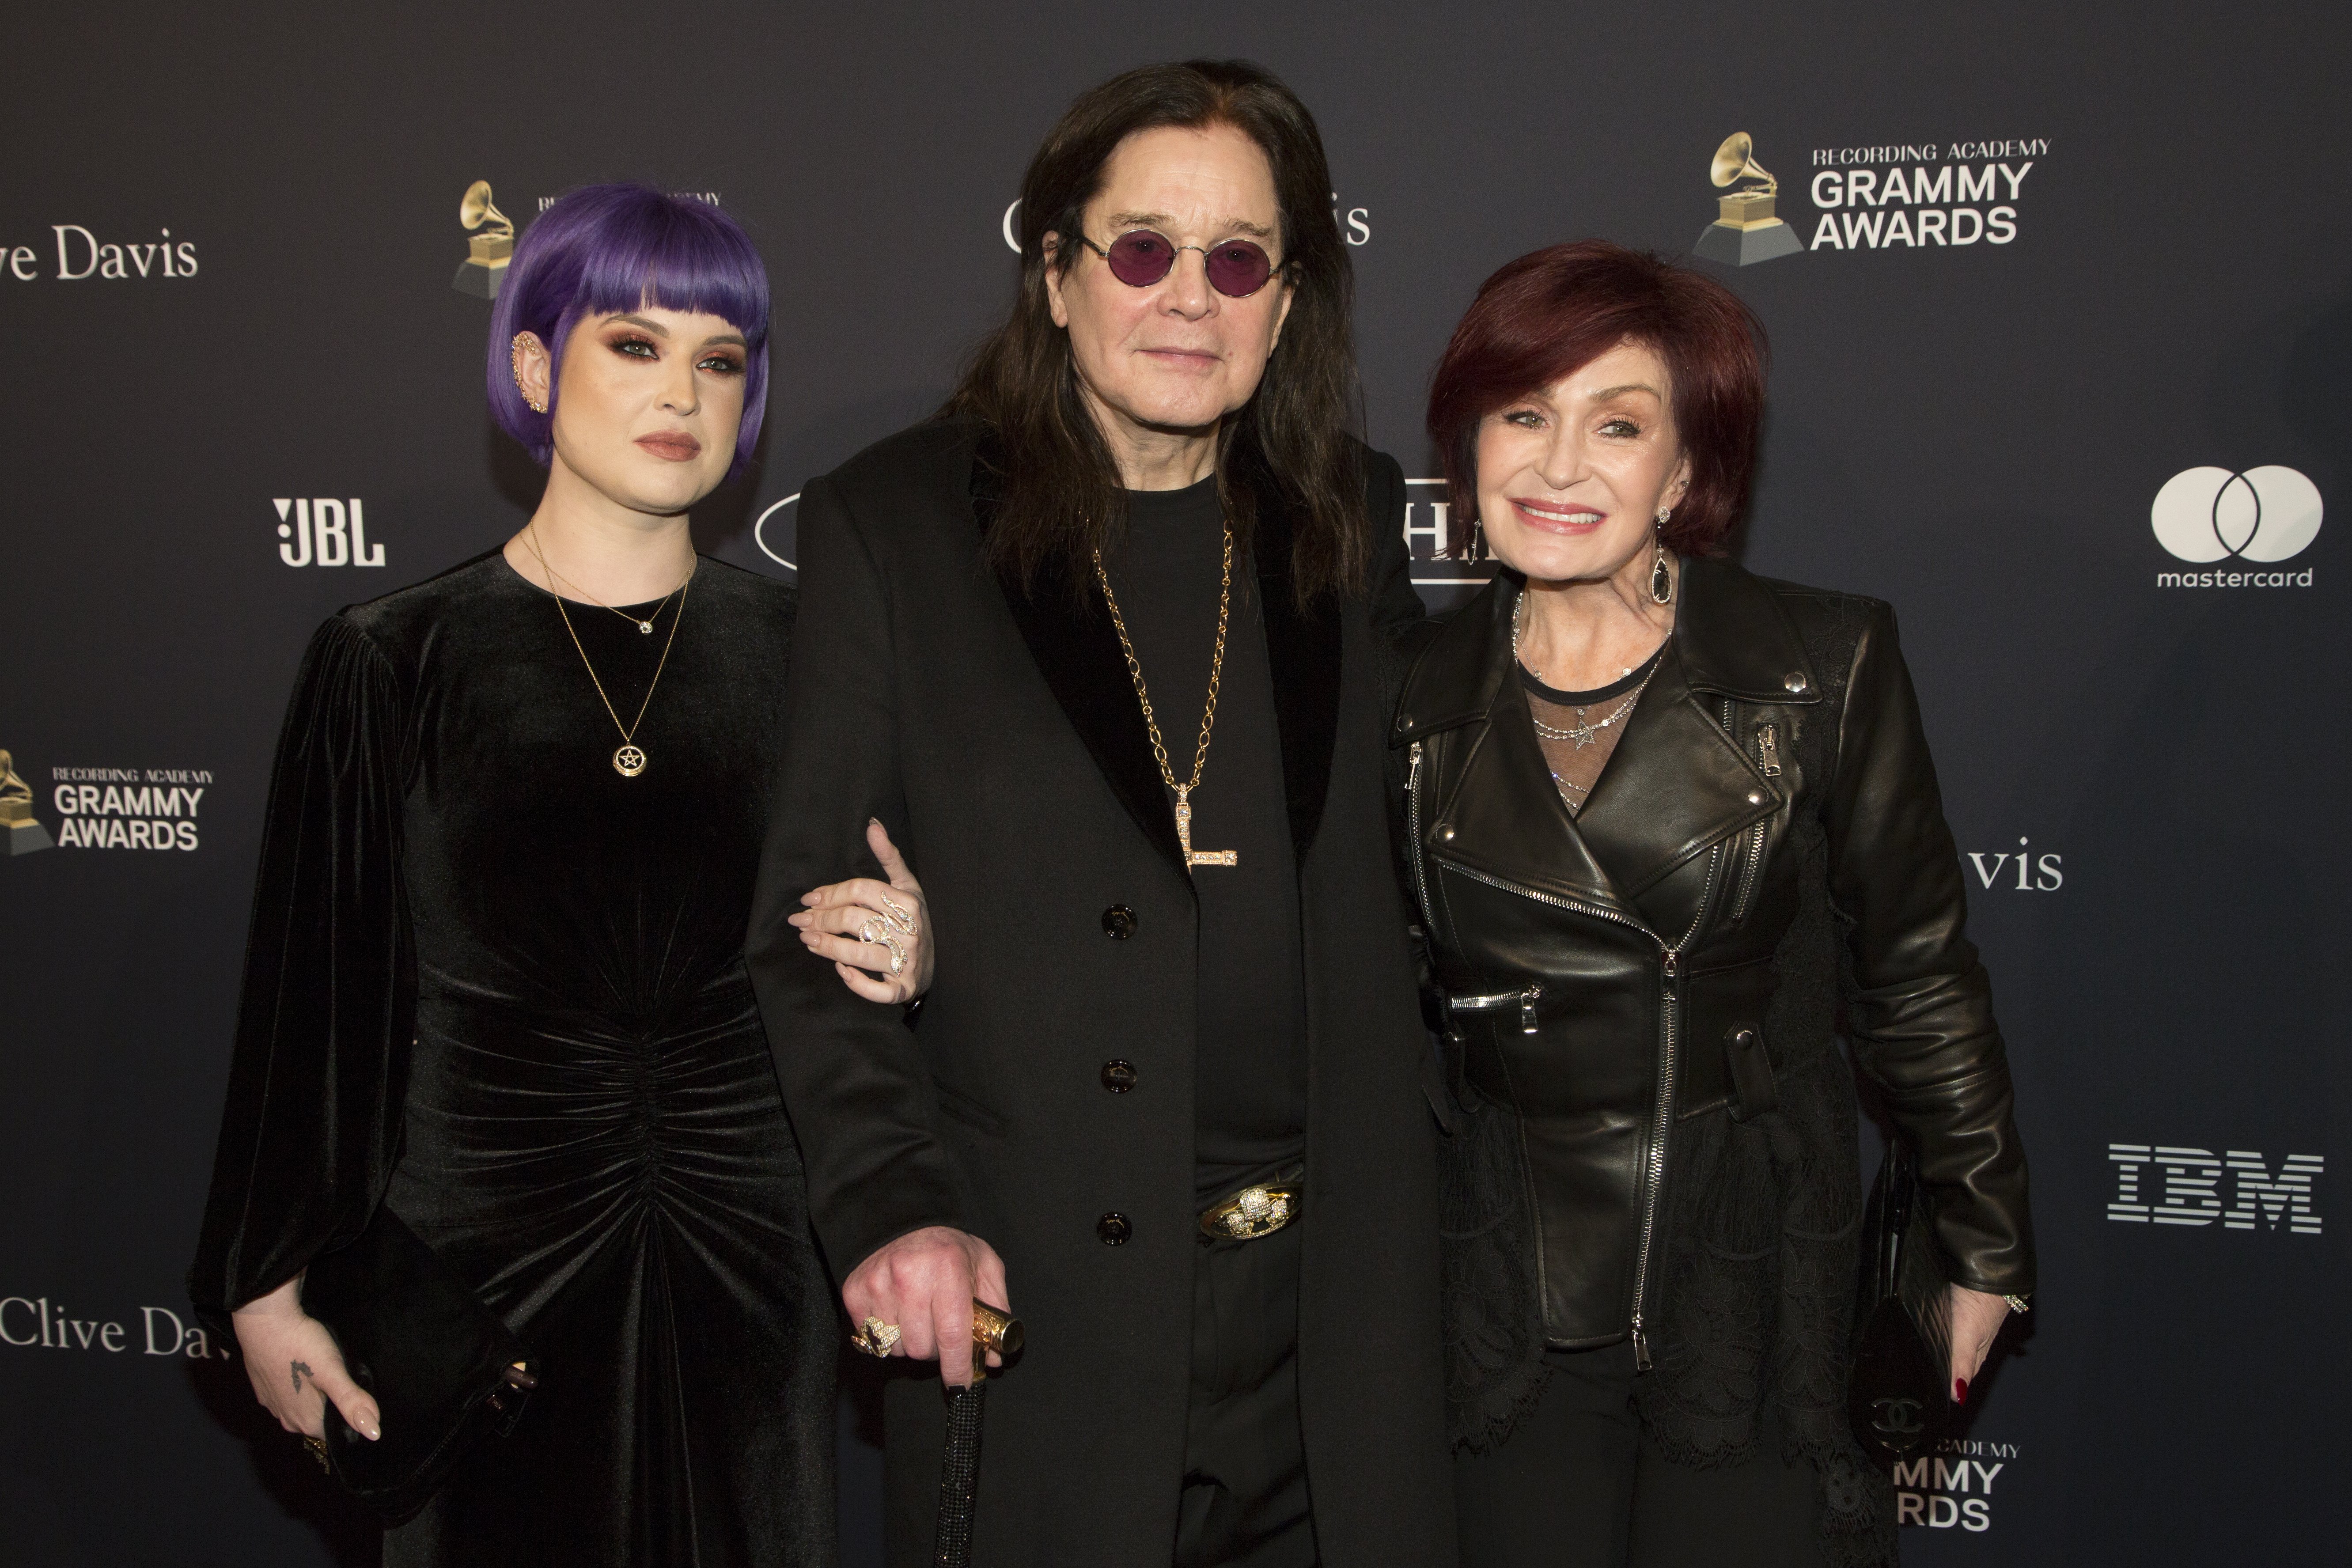 Kelly Osbourne and her parents Ozzy Osbourne and Sharon Osbourne attend the Pre-Grammy Gala at The Beverly Hilton Hotel on January 25, 2020 in Beverly Hills, California ┃Source: Getty Images